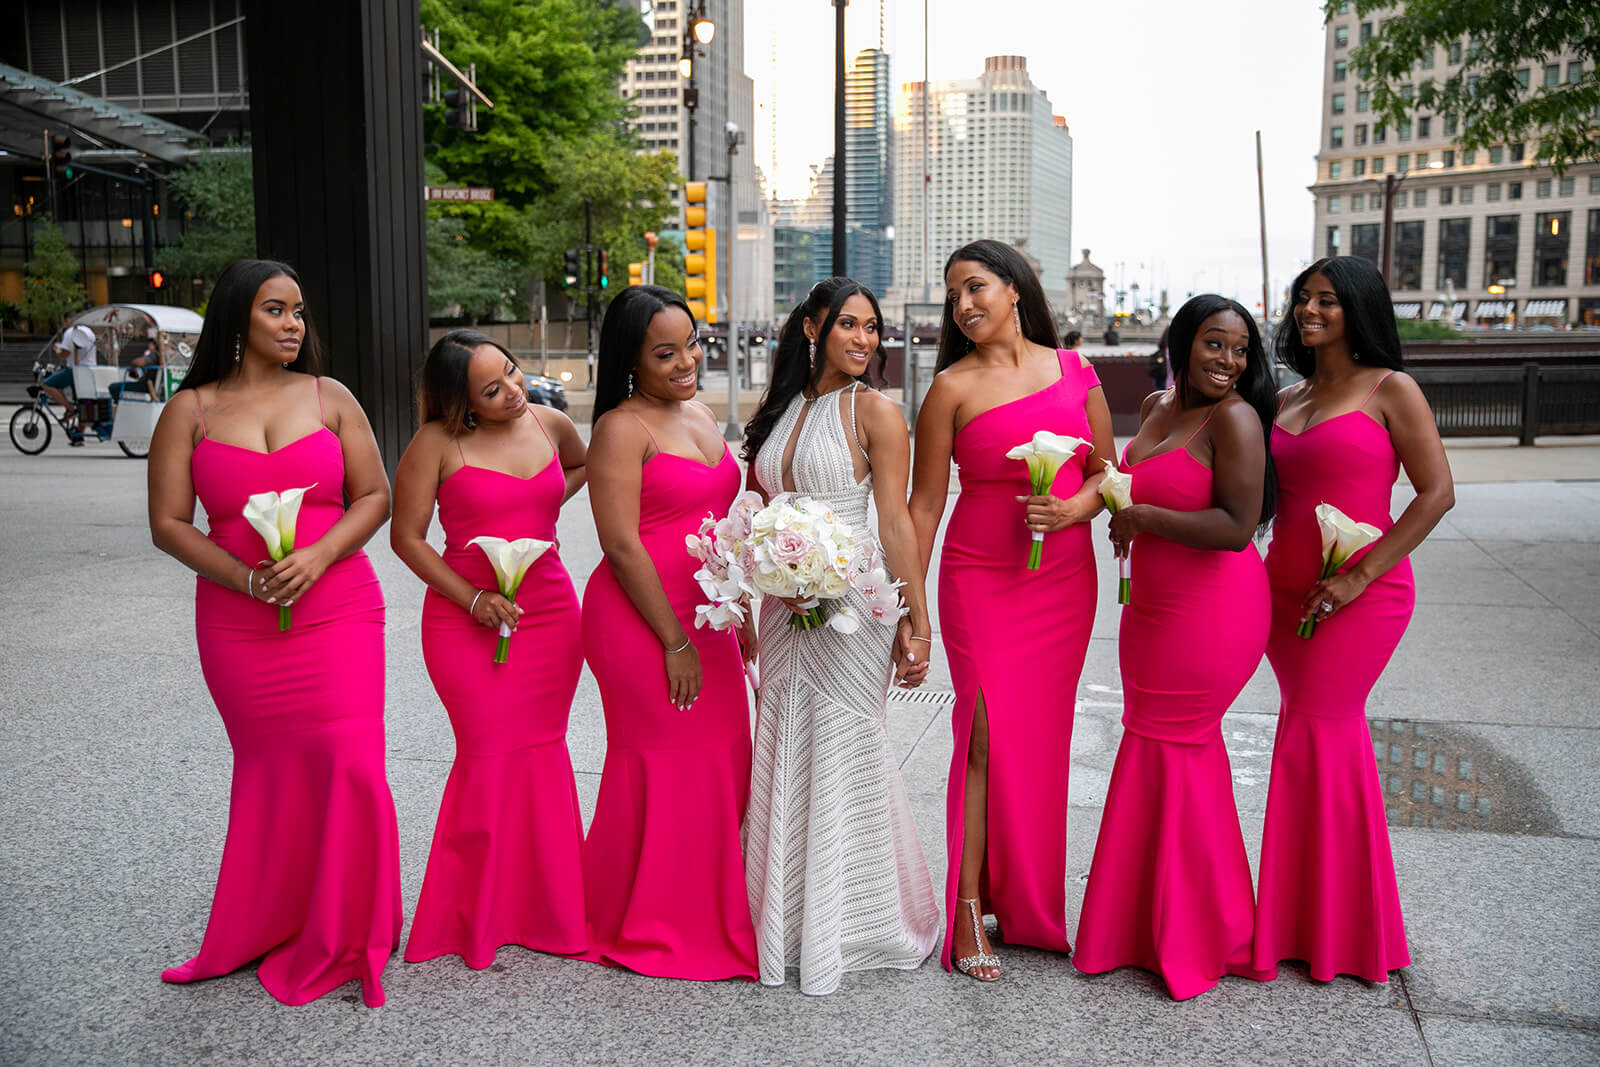 Bridesmaids wearing hot pink bridesmaids dresses, posing with bride in the middle of a Chicago street